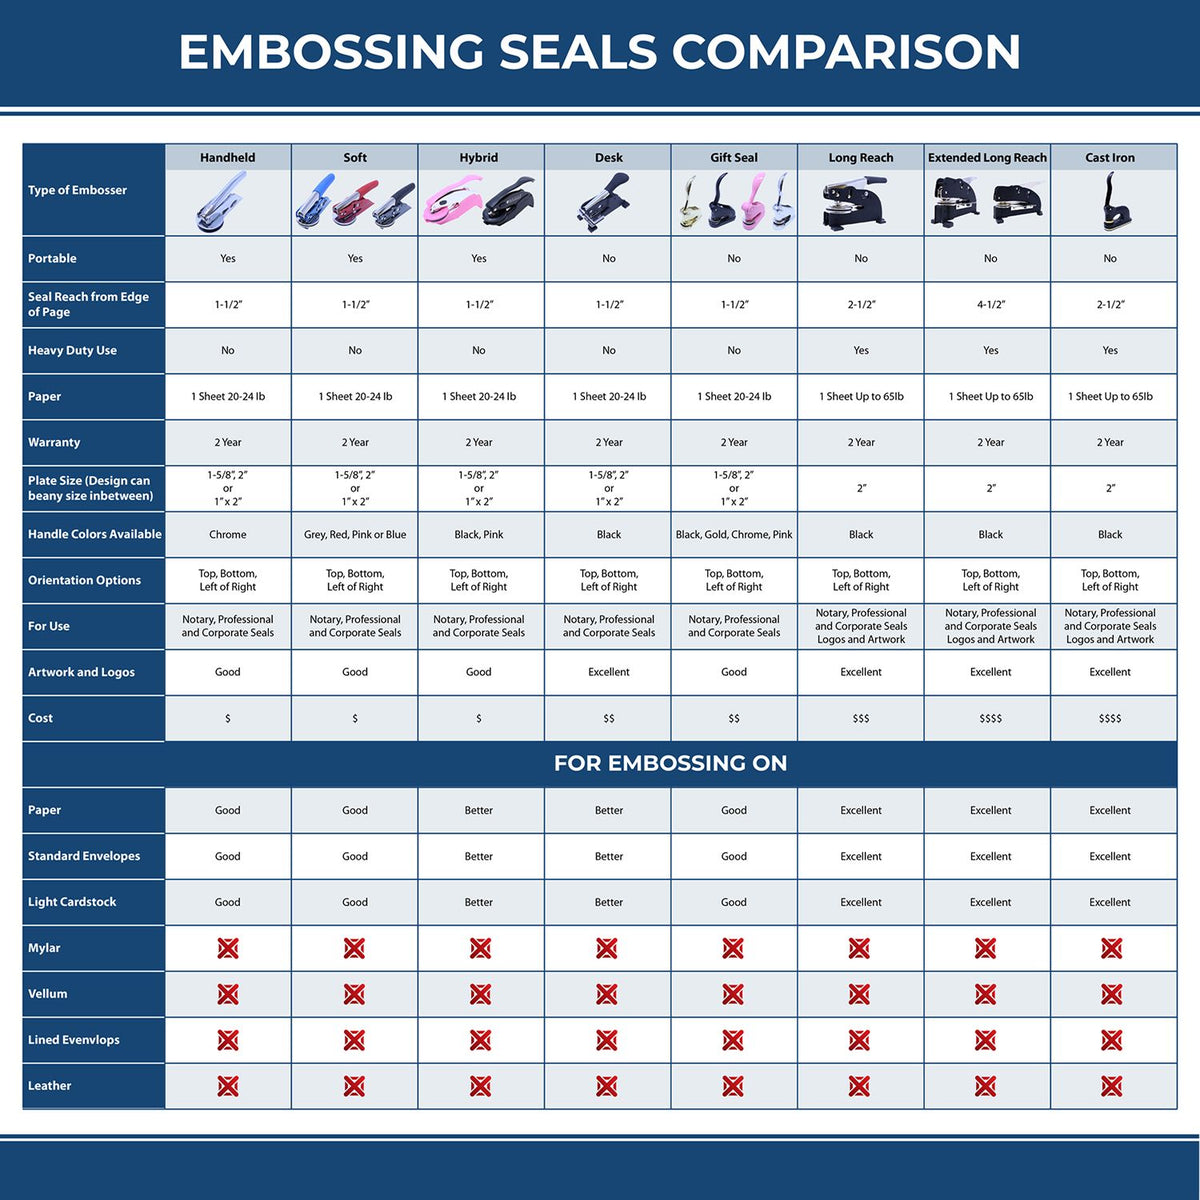 A comparison chart for the different types of mount models available for the Soft Wyoming Professional Geologist Seal